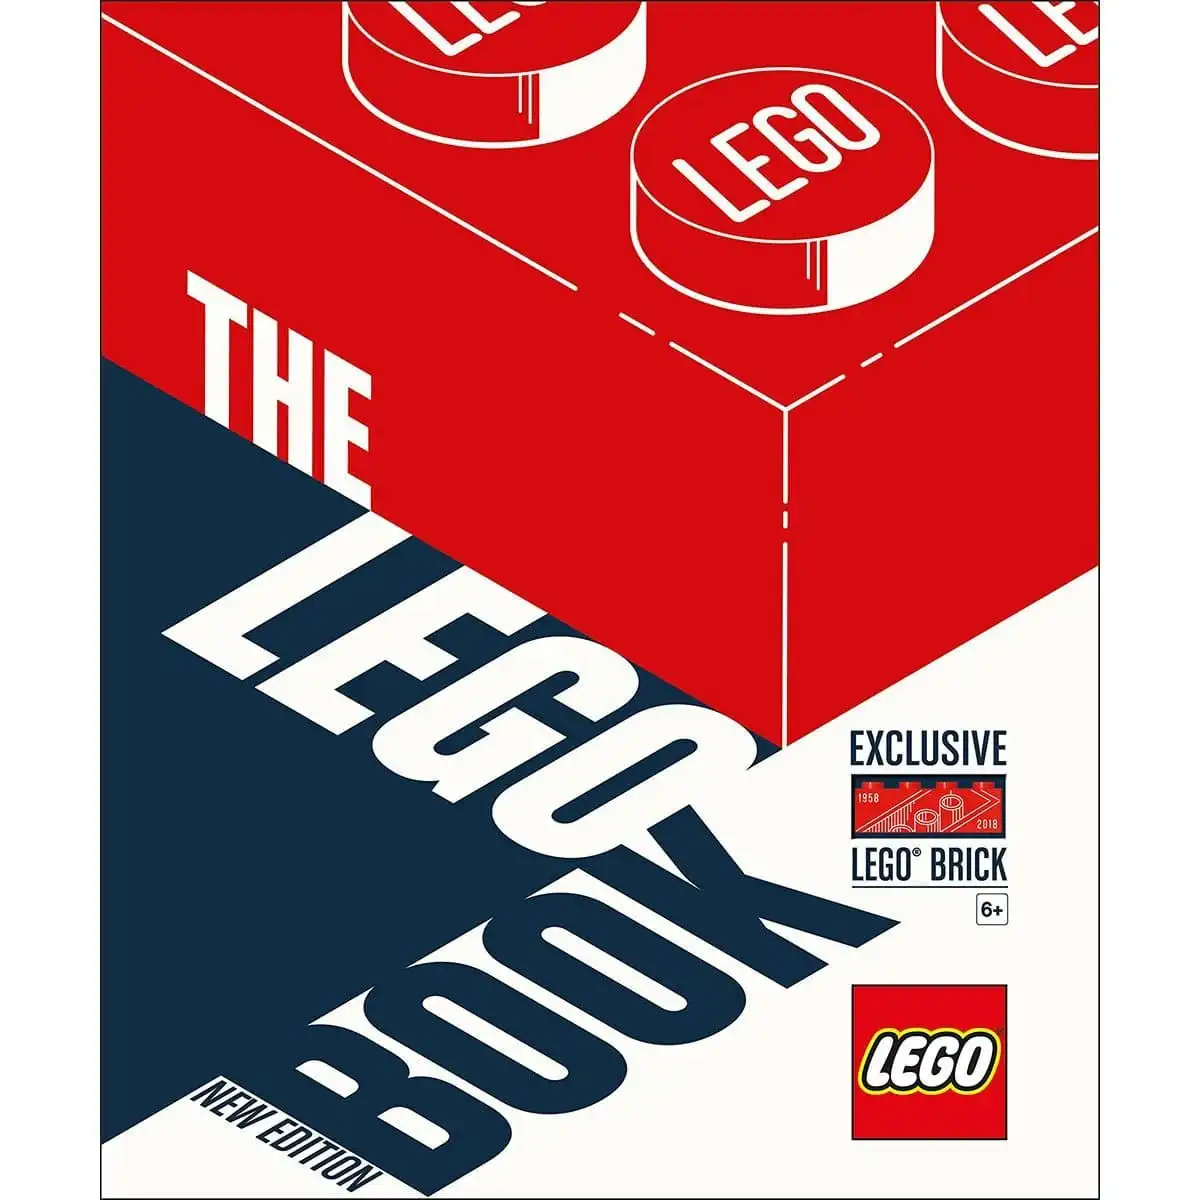 Promotional The Lego Book